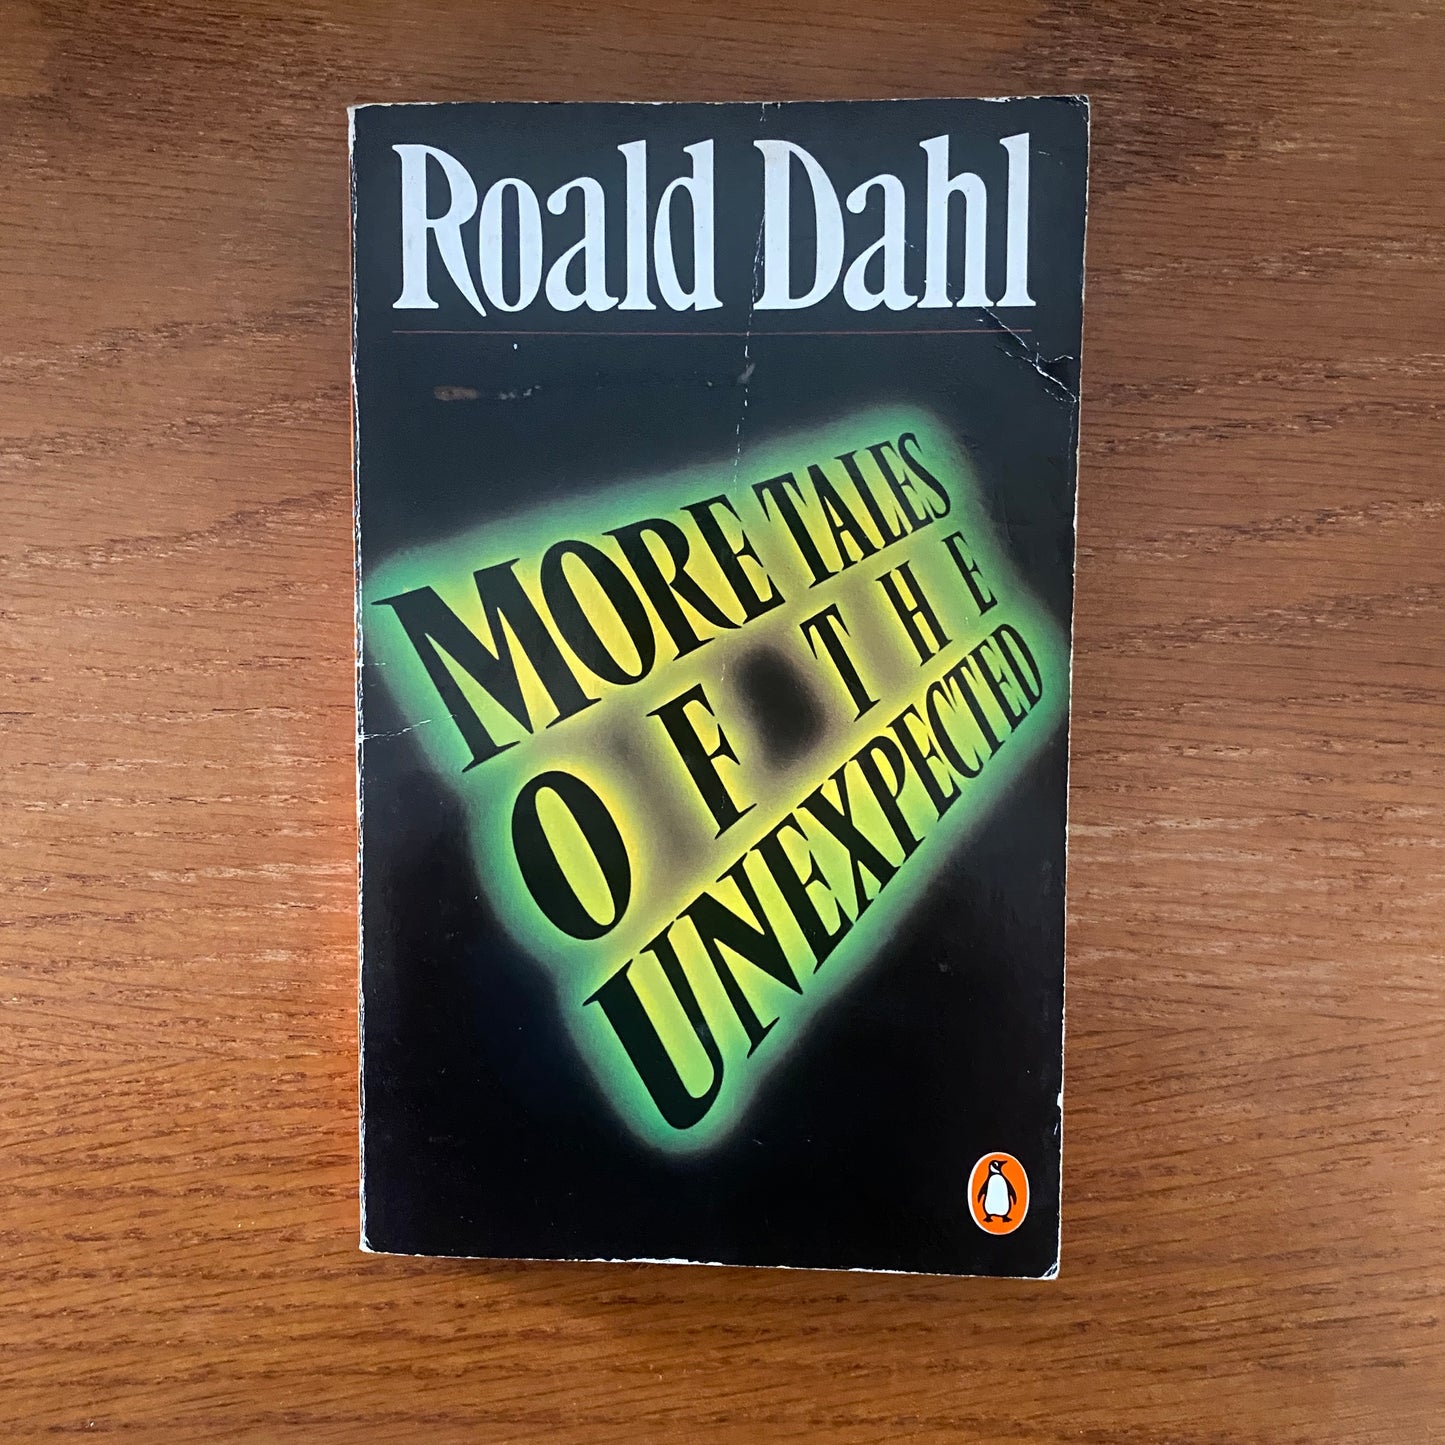 Roald Dahl - More Tales Of The Unexpected